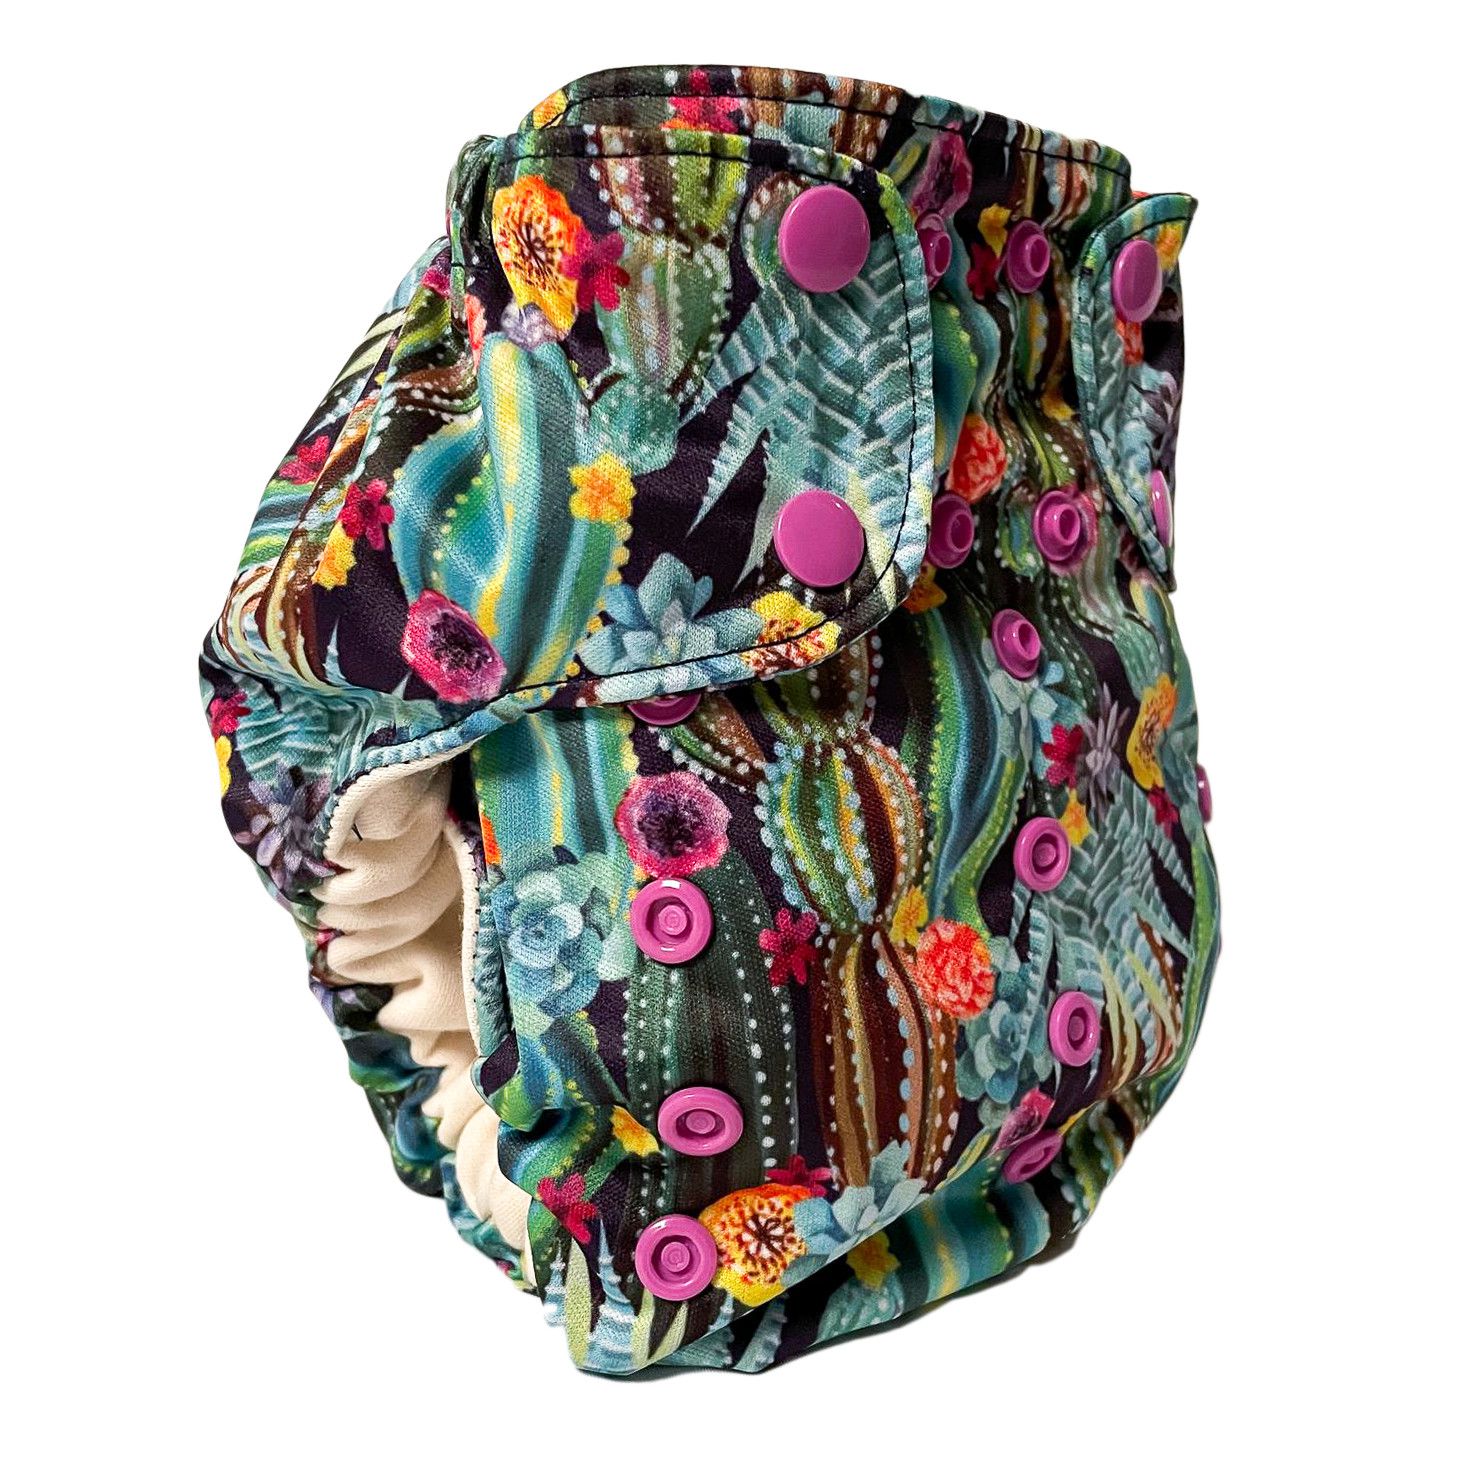 Smart Bottoms 3.1 One Size All-in-One nappy Pattern: Midnight Bloom